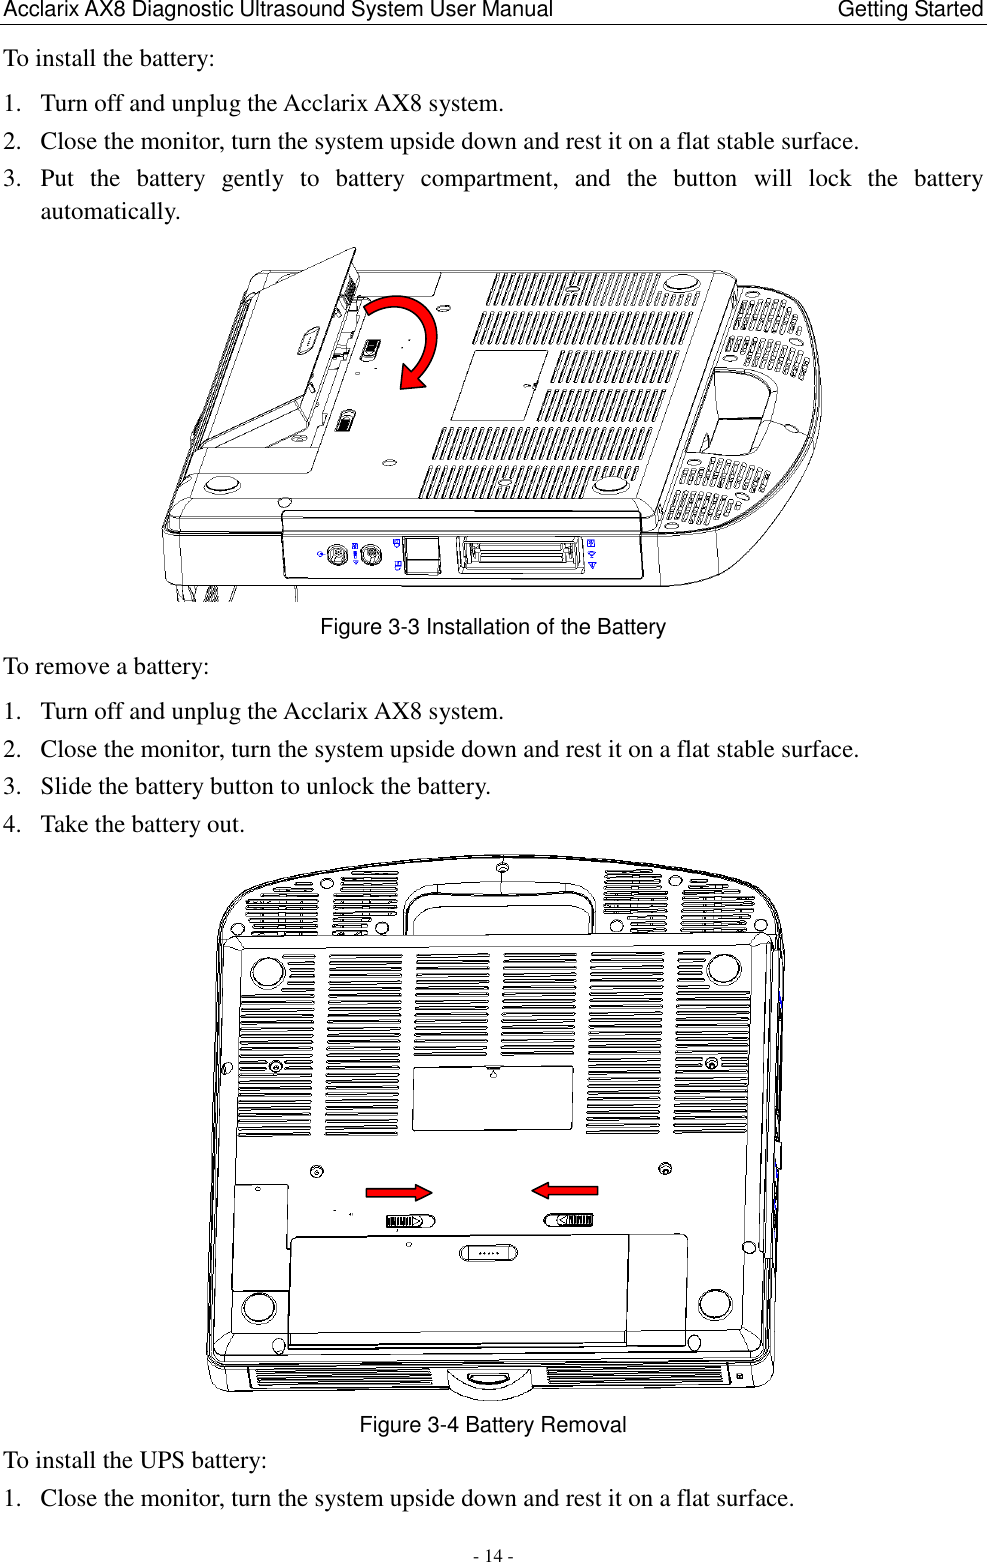 Acclarix AX8 Diagnostic Ultrasound System User Manual                                                Getting Started - 14 - To install the battery: 1. Turn off and unplug the Acclarix AX8 system. 2. Close the monitor, turn the system upside down and rest it on a flat stable surface. 3. Put  the  battery  gently  to  battery  compartment,  and  the  button  will  lock  the  battery automatically.    Figure 3-3 Installation of the Battery To remove a battery: 1. Turn off and unplug the Acclarix AX8 system. 2. Close the monitor, turn the system upside down and rest it on a flat stable surface. 3. Slide the battery button to unlock the battery. 4. Take the battery out.  Figure 3-4 Battery Removal   To install the UPS battery: 1. Close the monitor, turn the system upside down and rest it on a flat surface. 